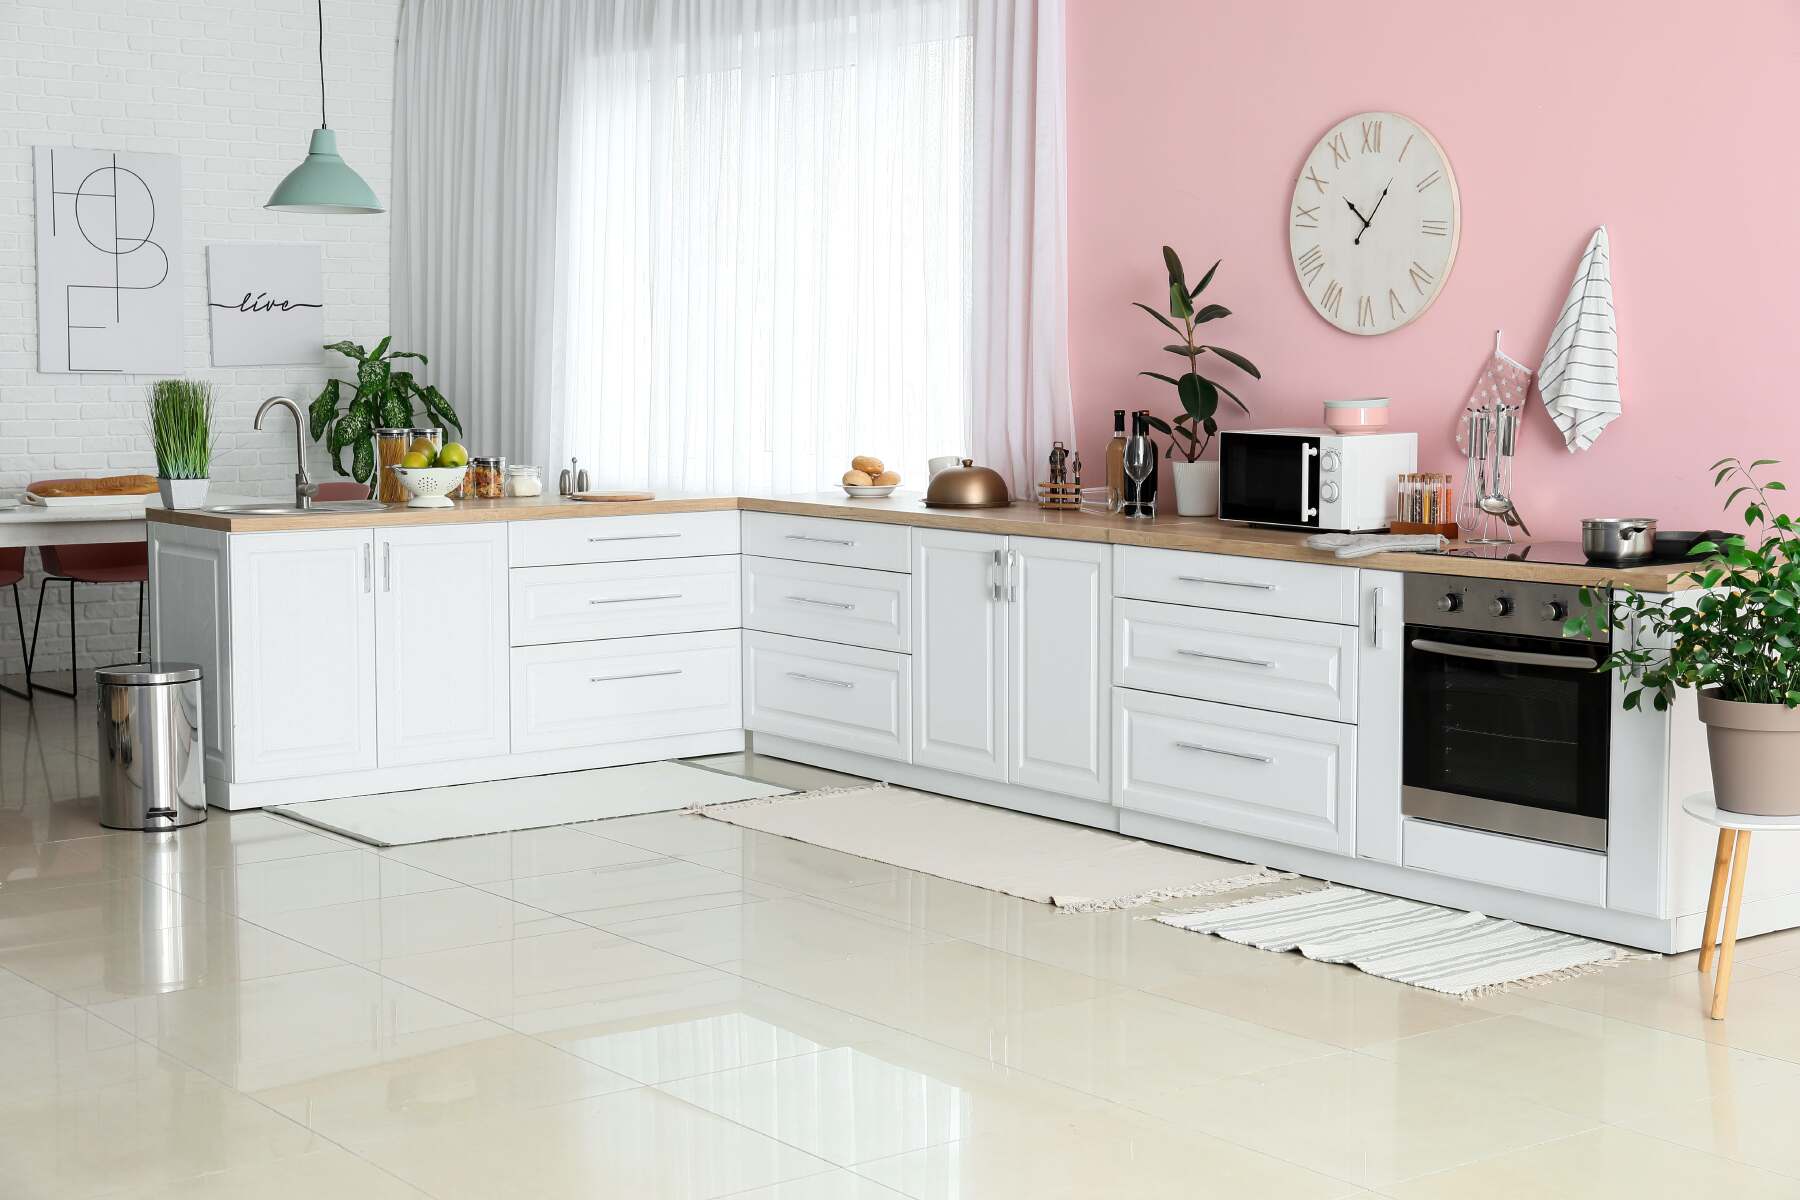 soft pink and white kitchen